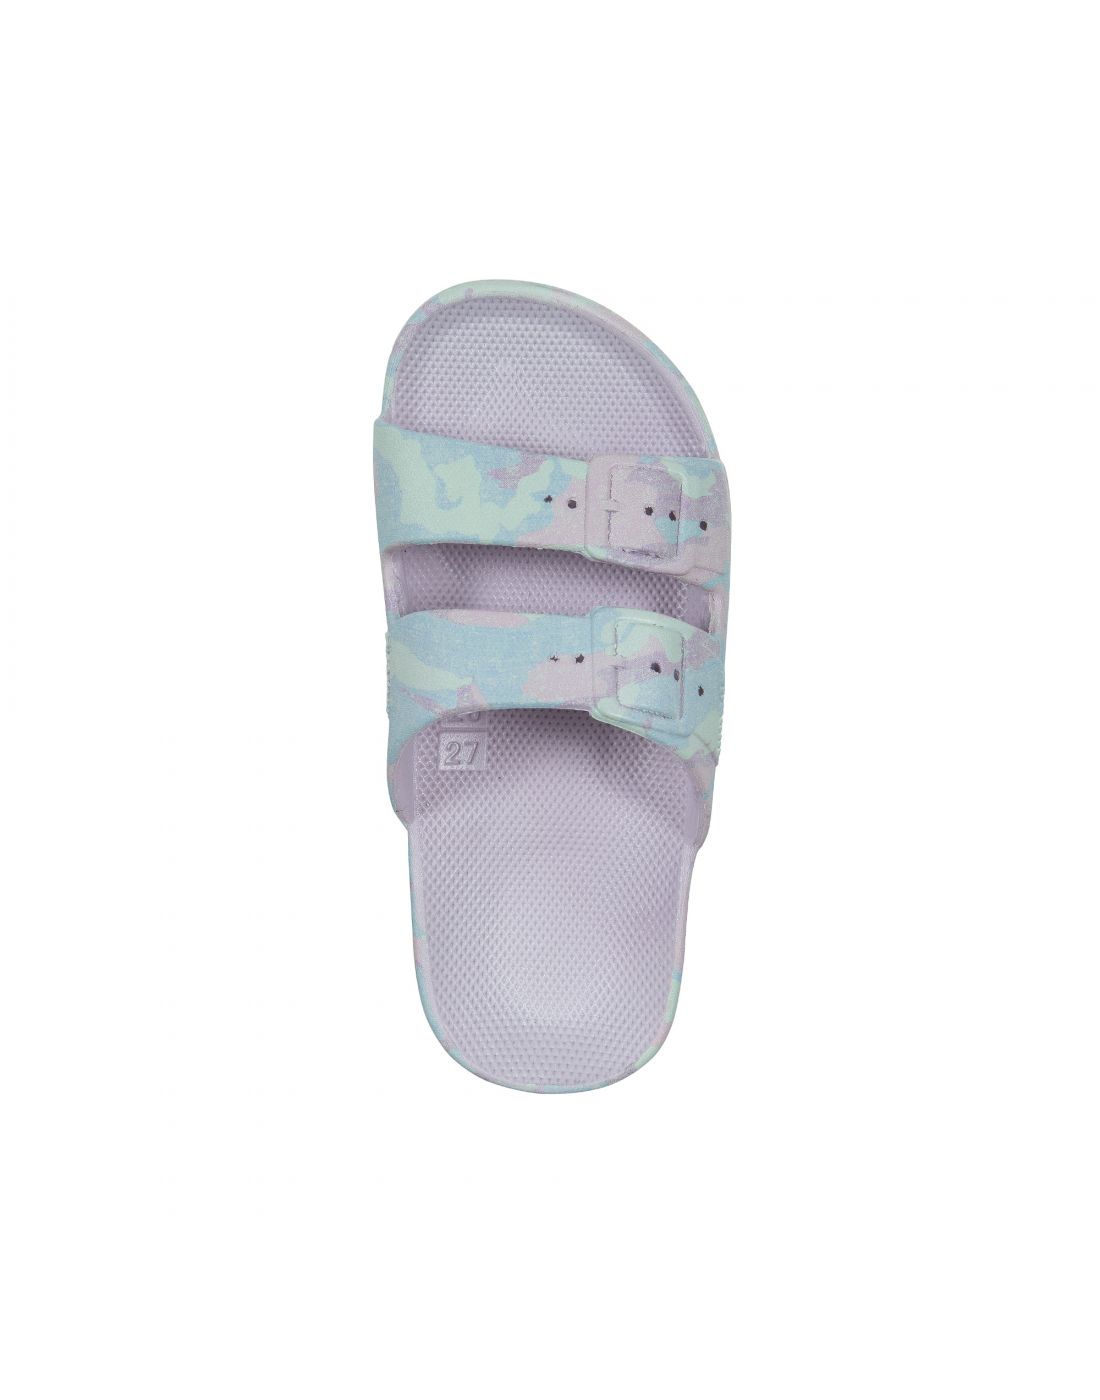 Freedom Moses Shoes Girls Flip-Flops